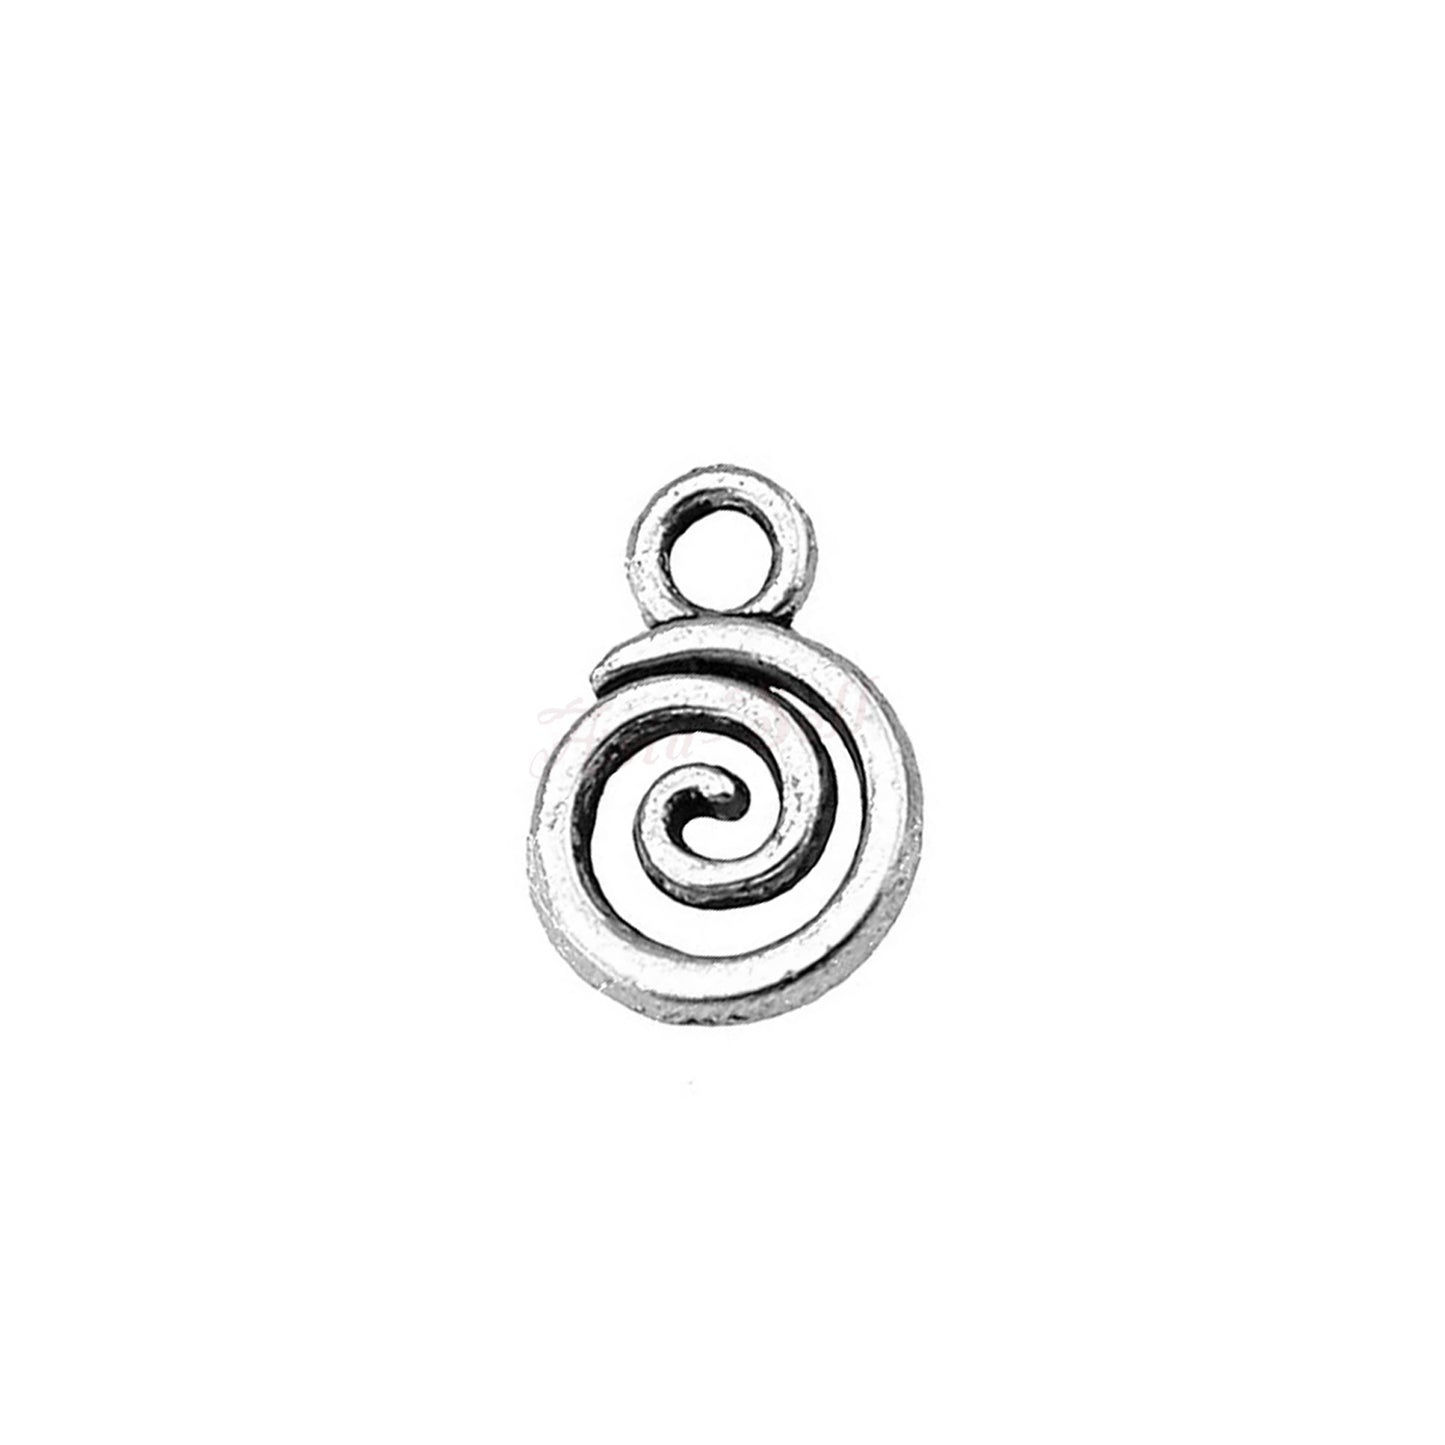 40pcs Swirl Charm Pendants 11x8mm For Jewelry Making Antique Silver Colour